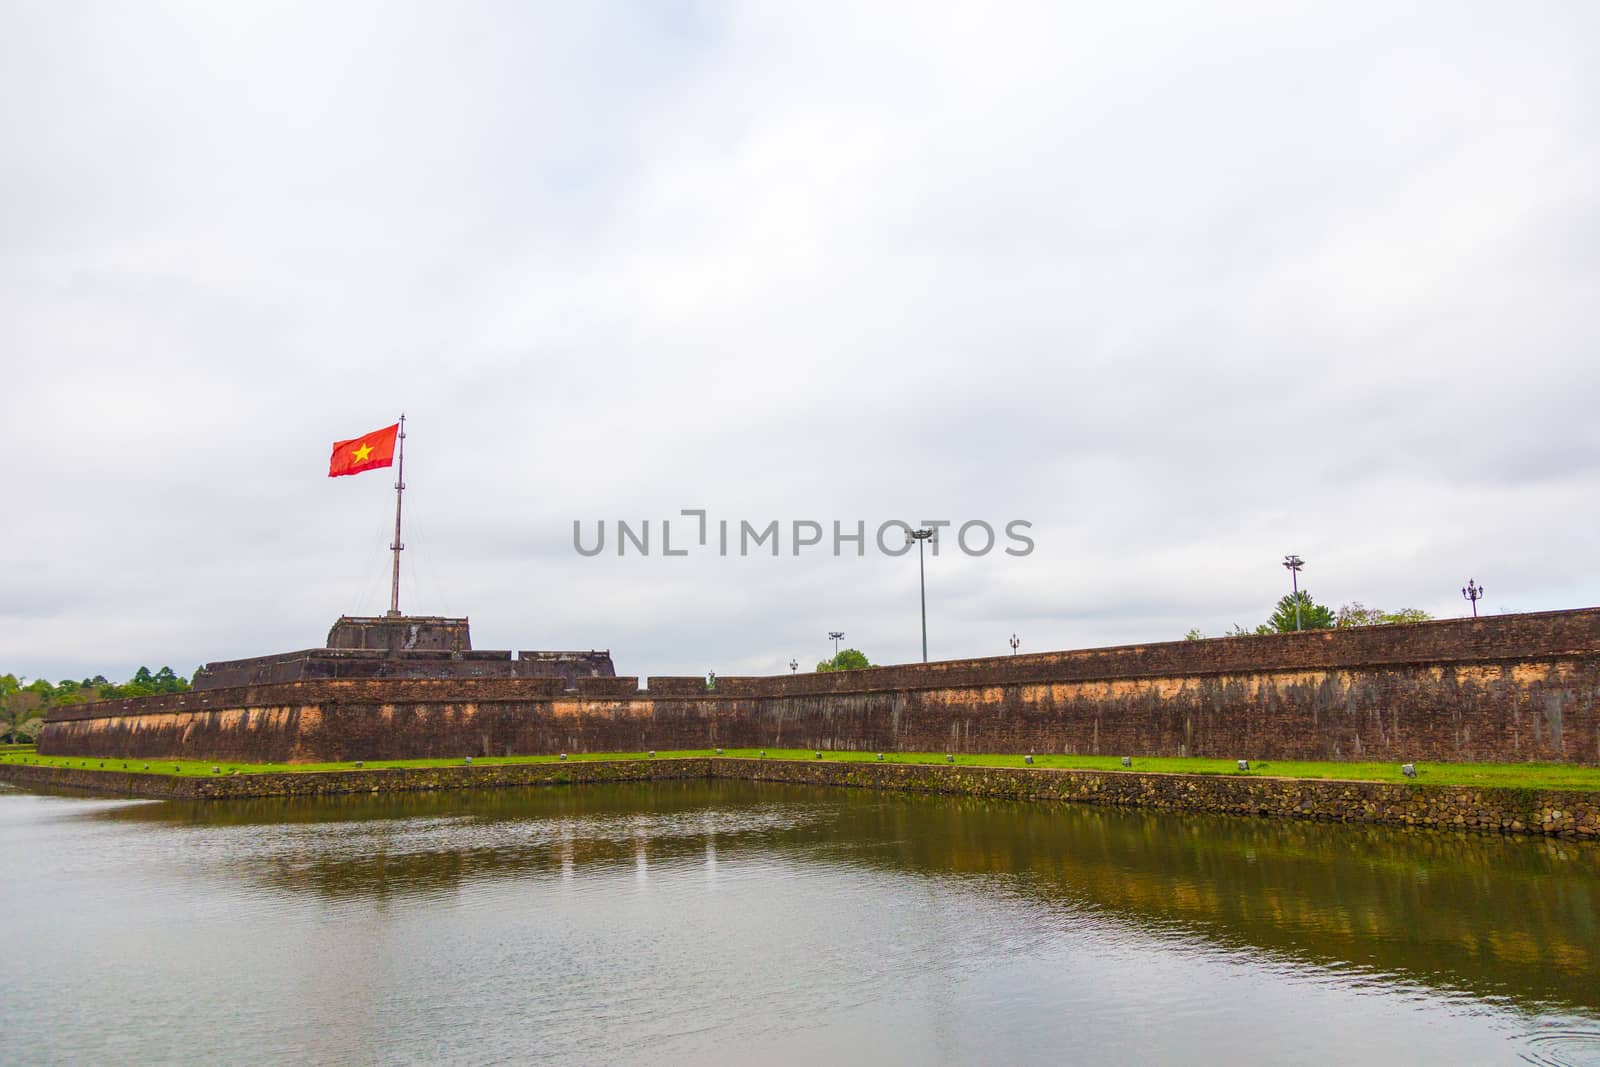 Hue, ancient capital of Vietnam. Ancient Citadel with gate and national flag. by kgboxford